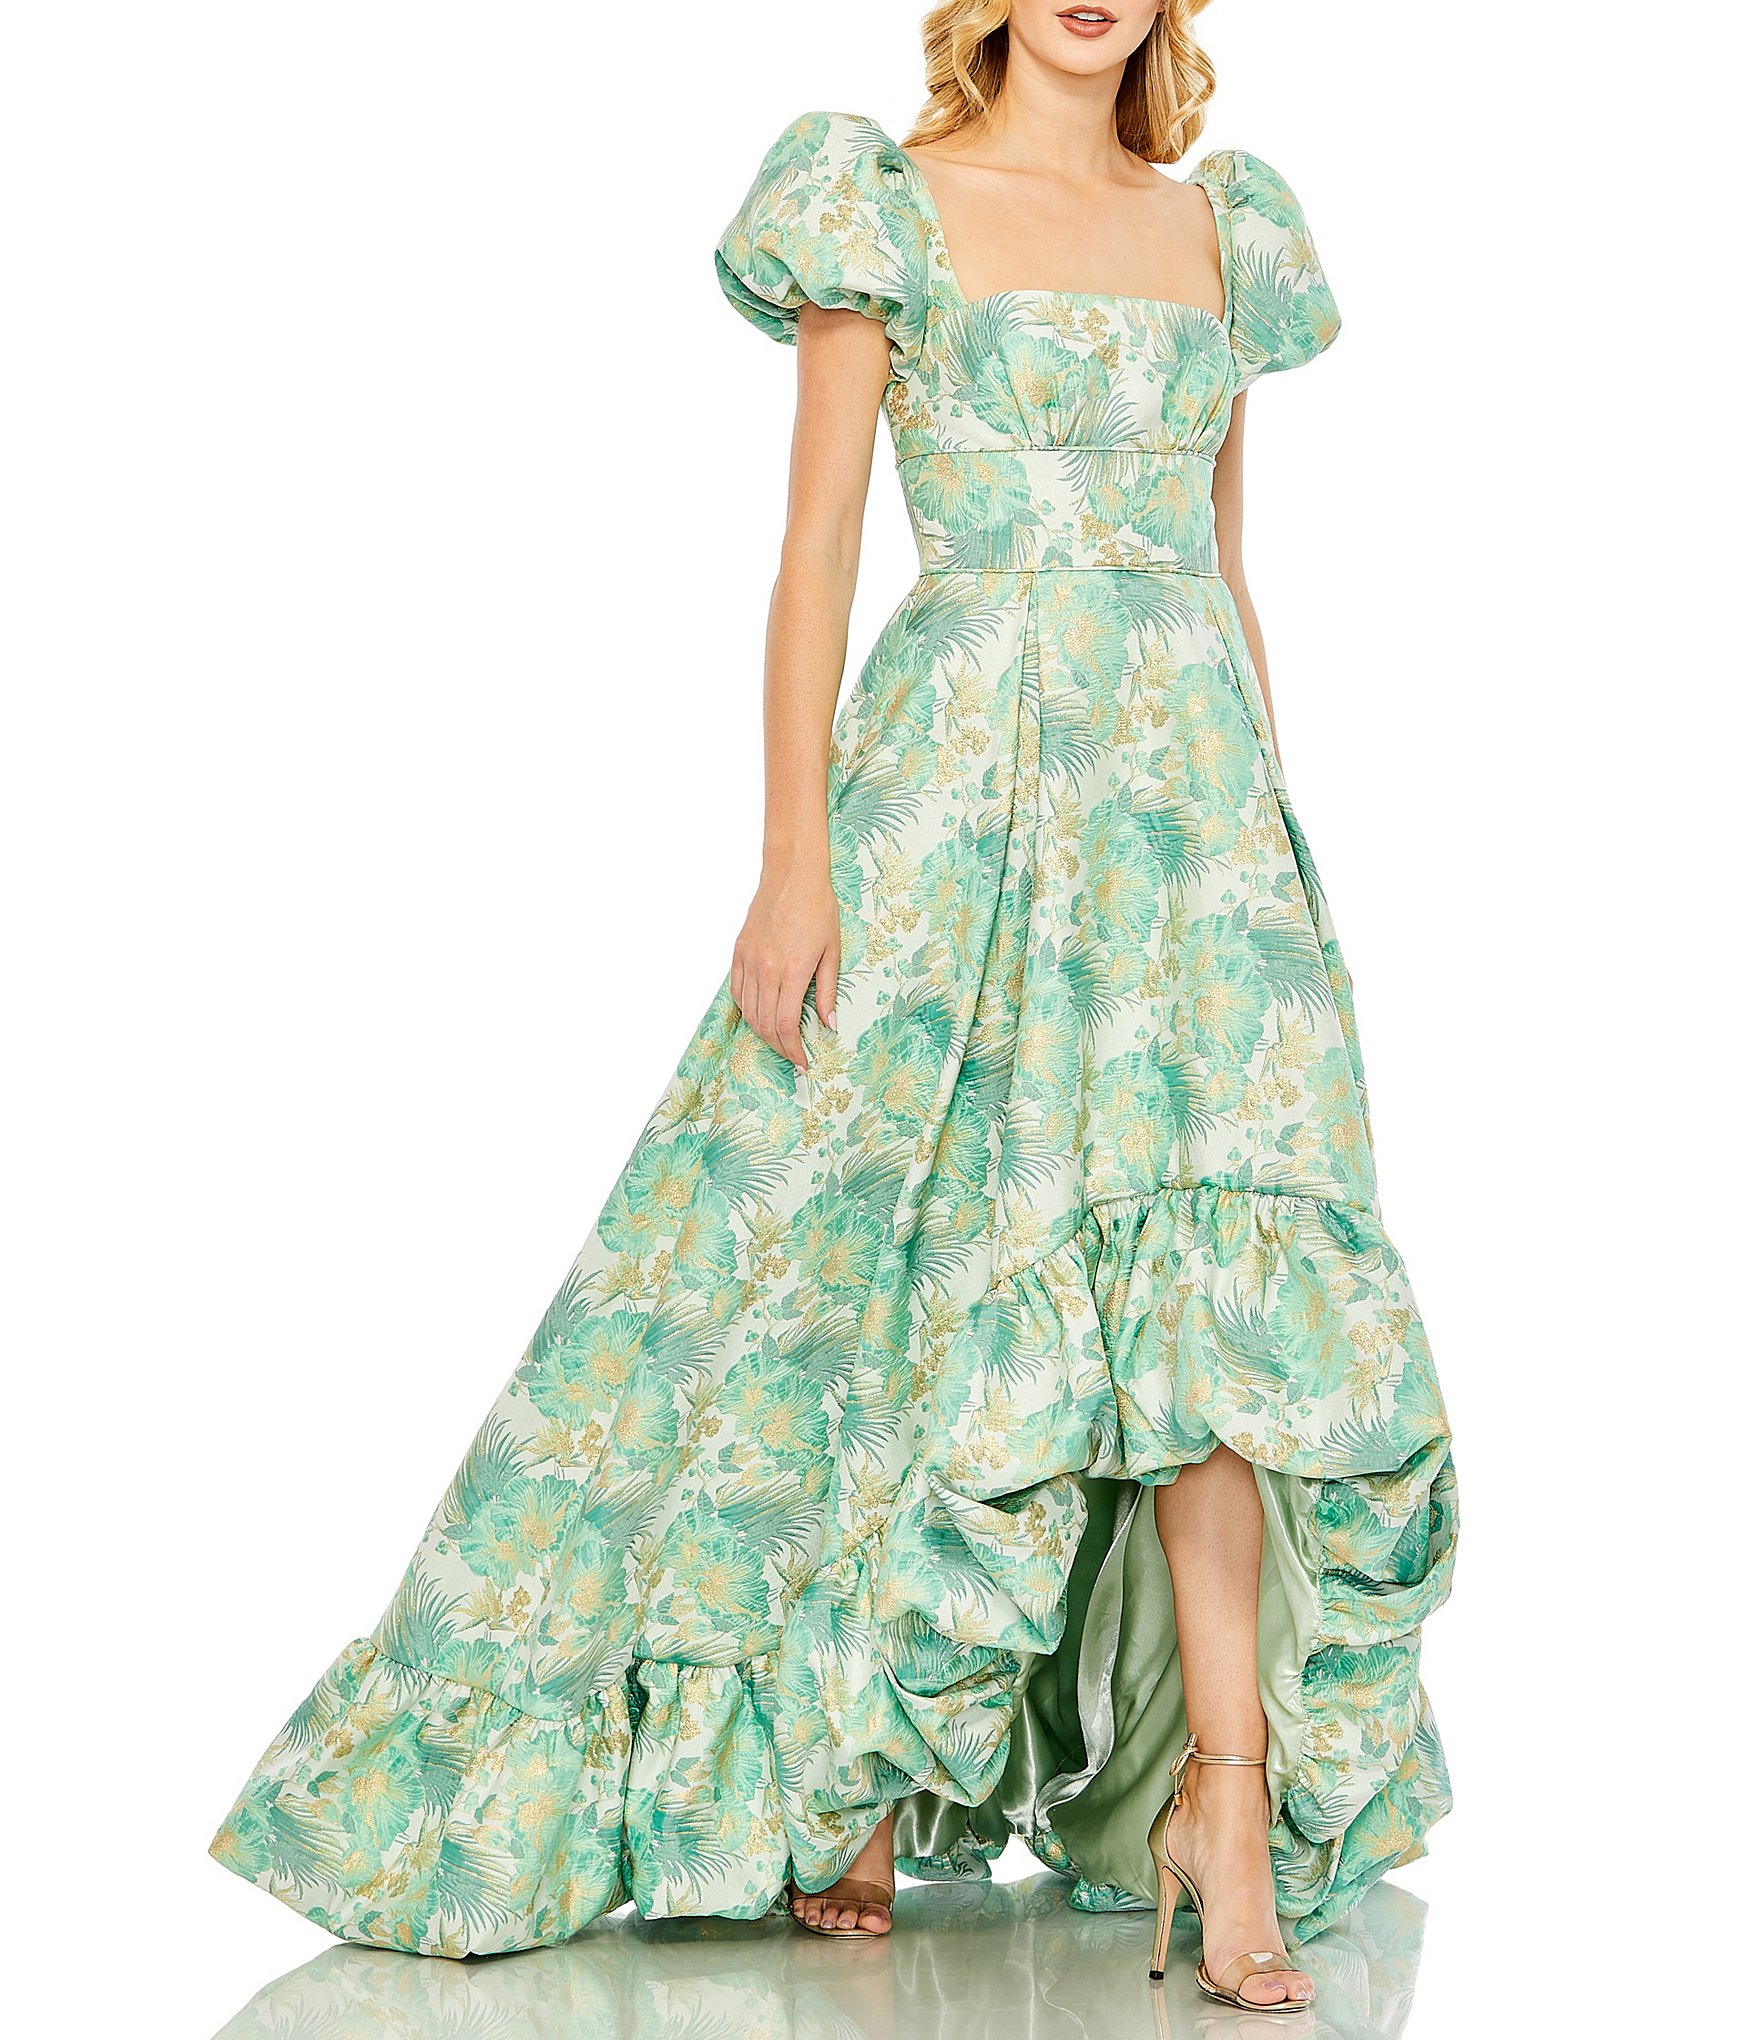 R & M Richards Watercolor Floral Printed Chiffon V-Neck Tiered Ruffle  High-Low Hem 3/4 Sleeve 2-Piece Jacket Dress